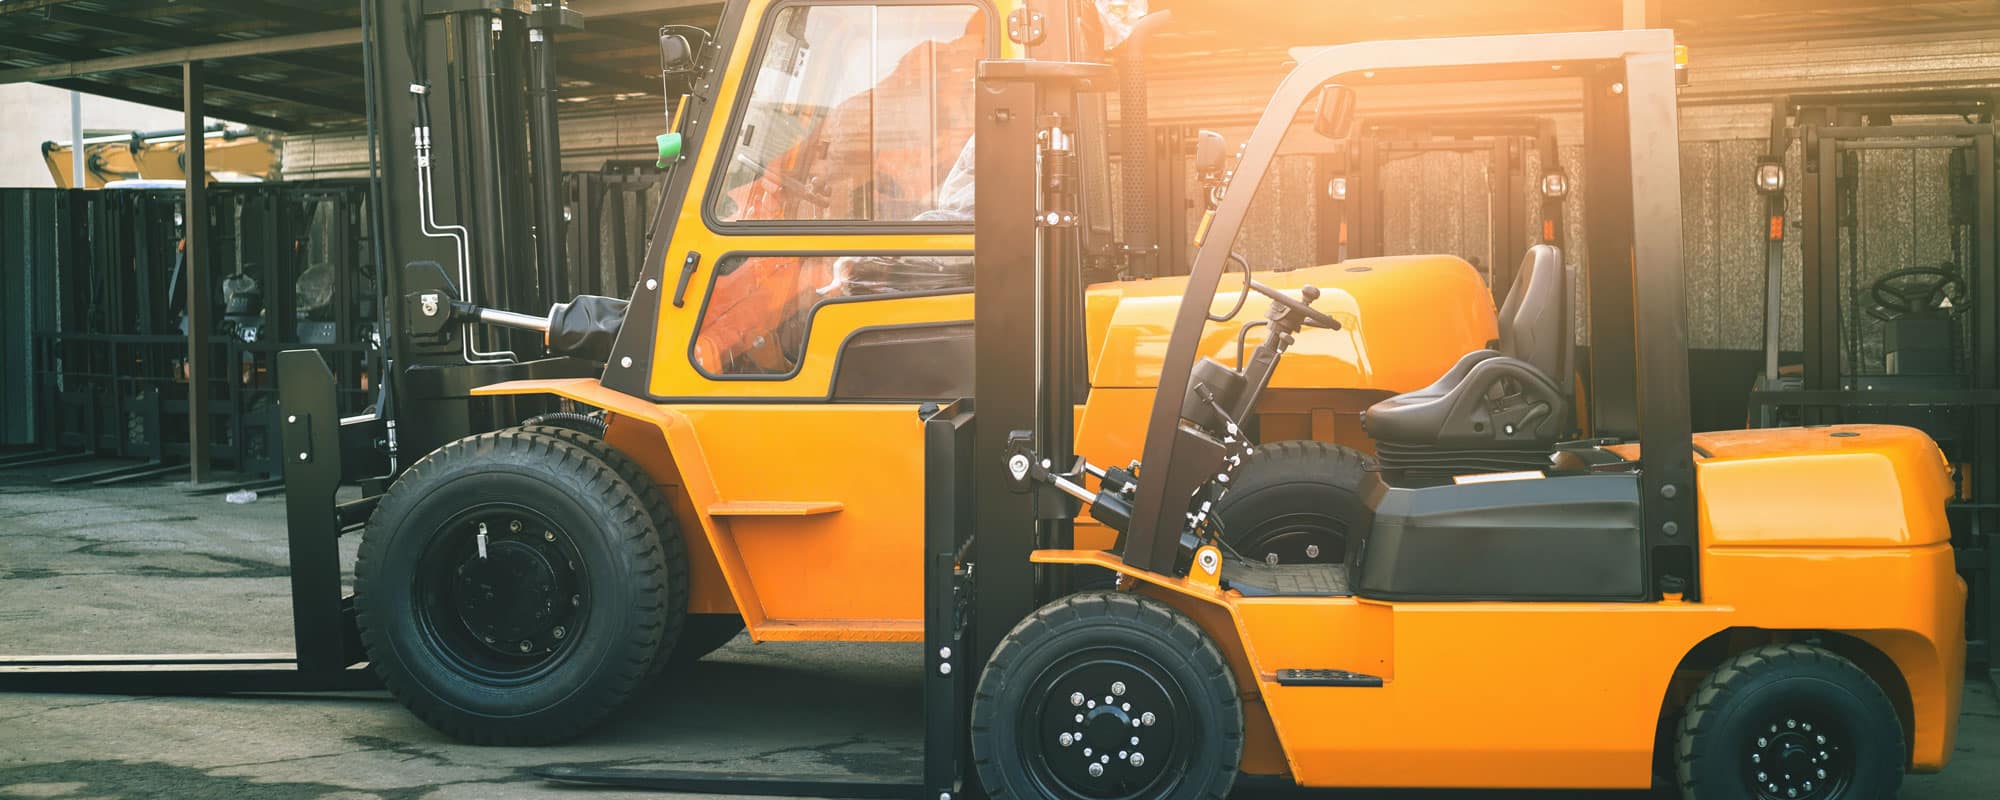 Forklifts Hire Repairs Sydney New Used Forklifts For Sale